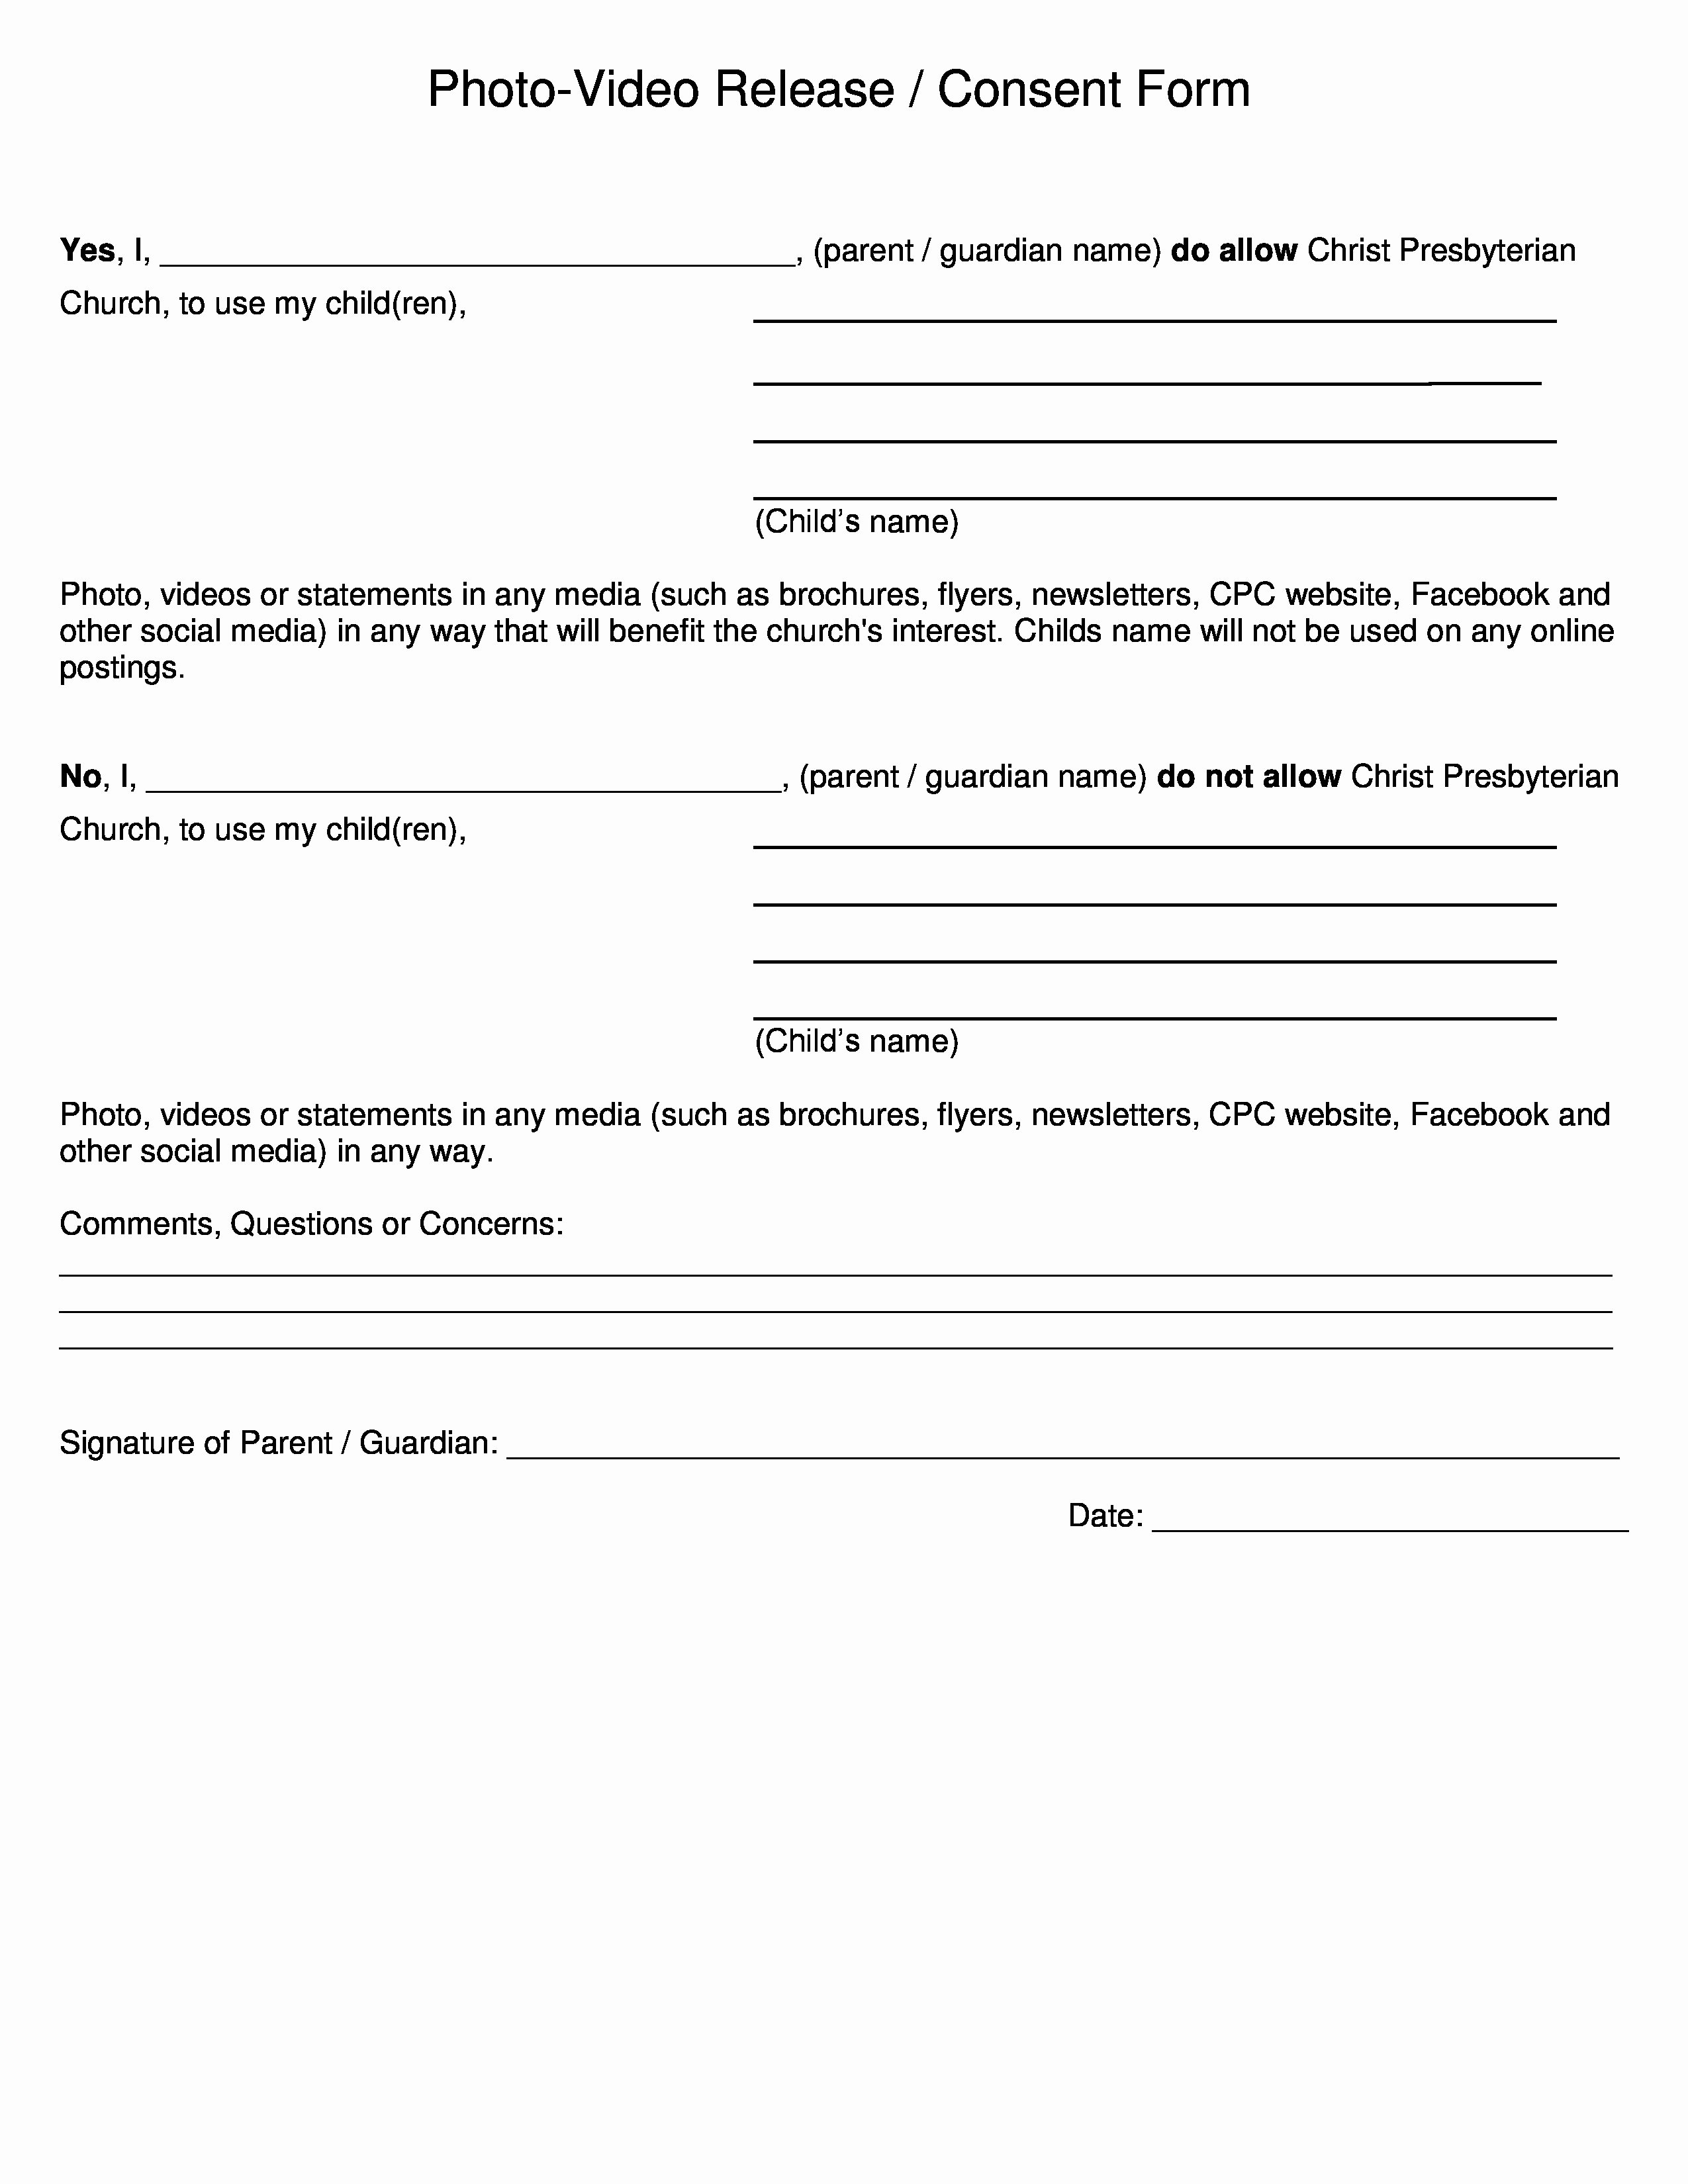 Social Media Permission form Awesome Video Release Consent form Christ Presbyterian Church